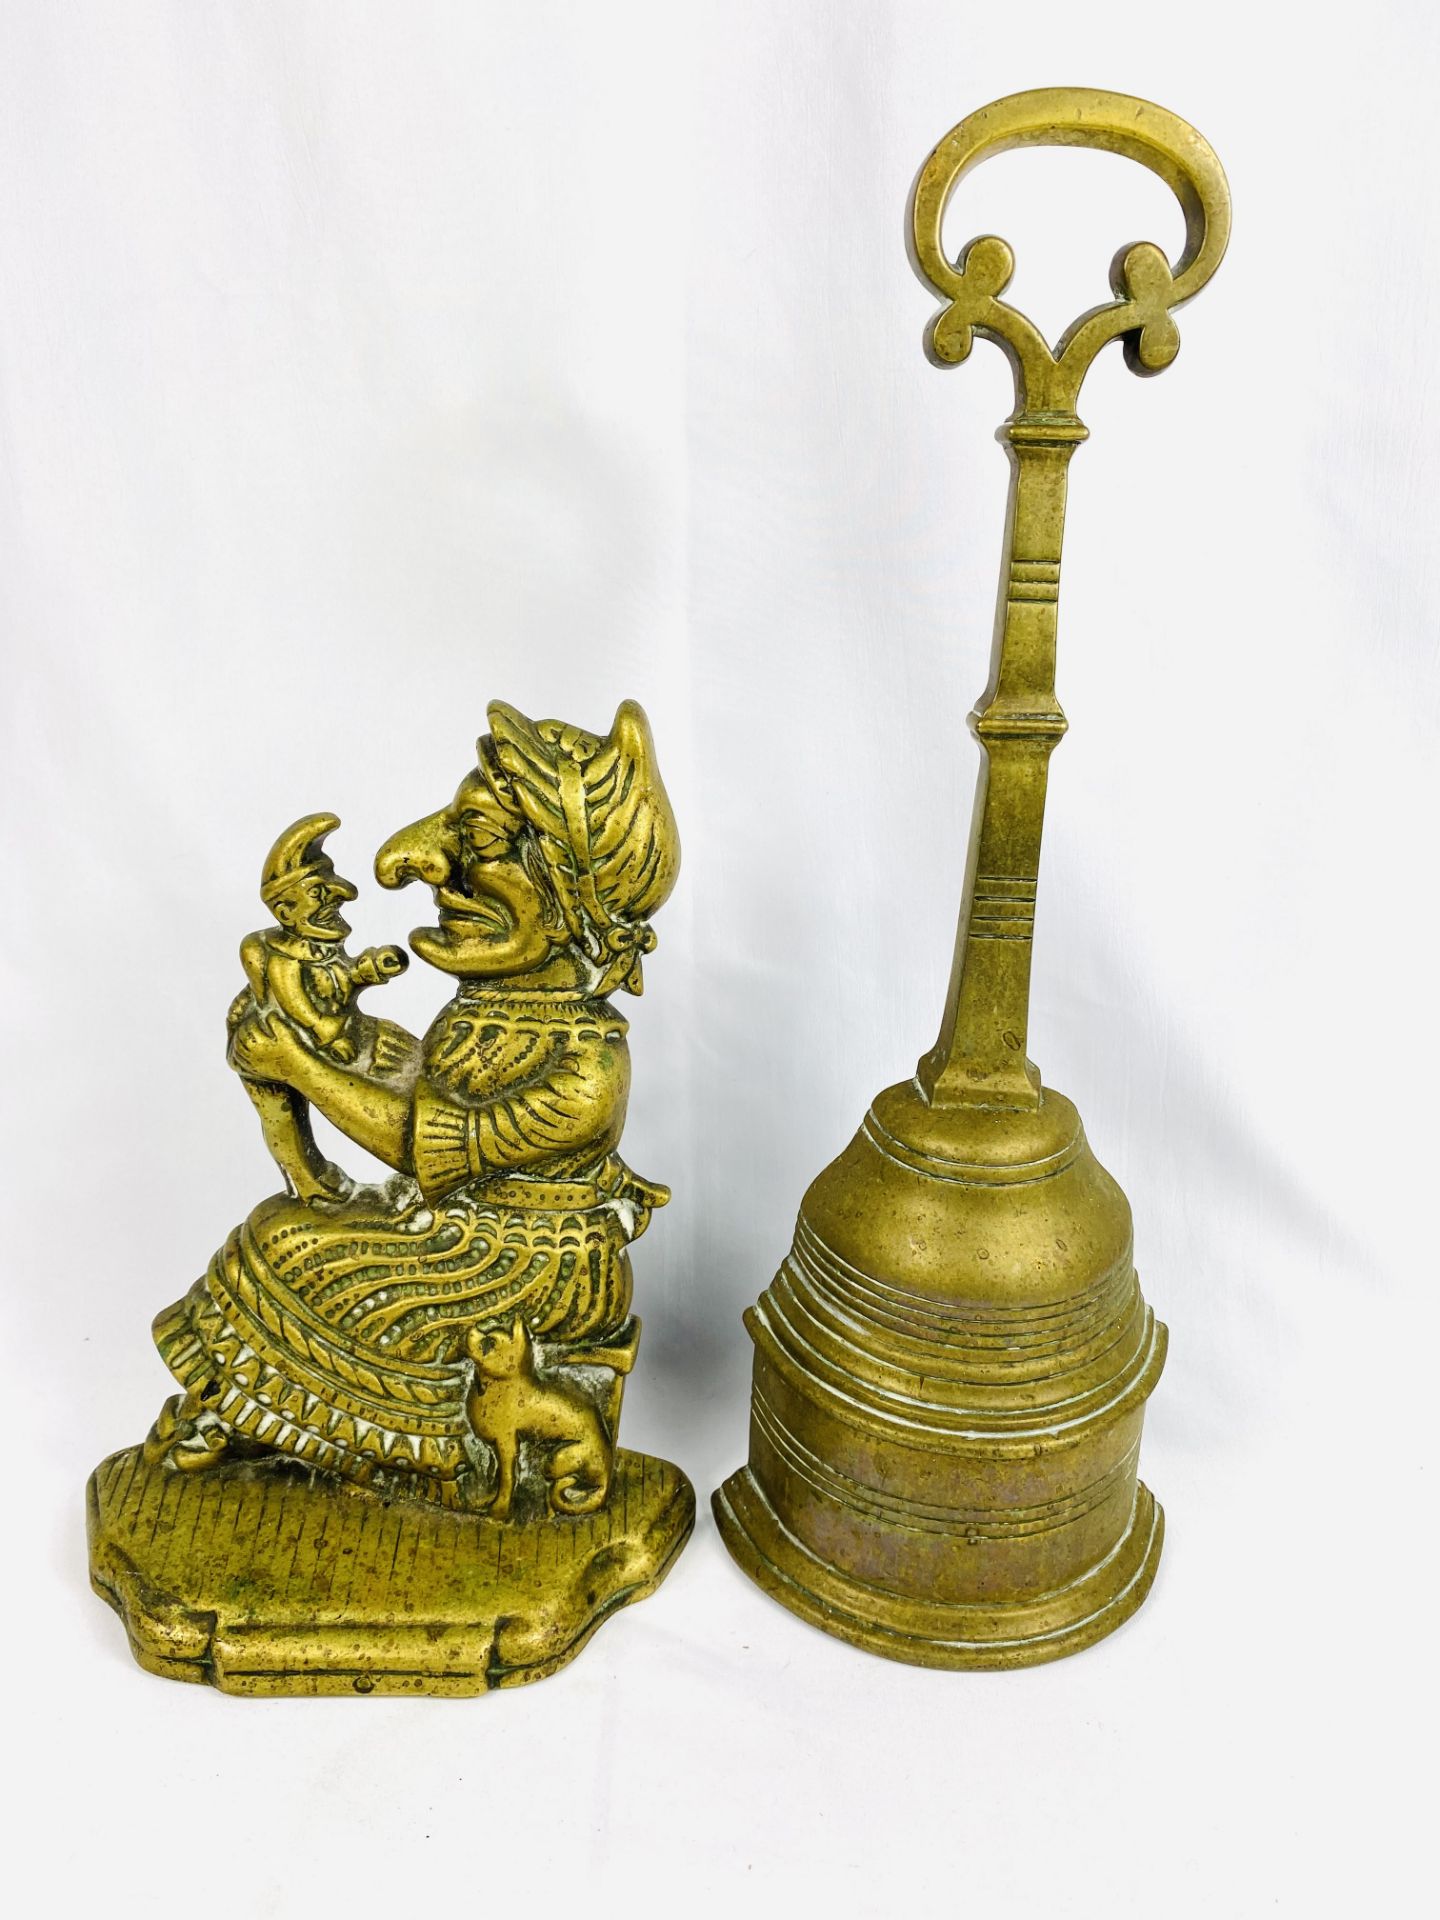 Victorian lead filled brass doorstop together with a Judy doorstop